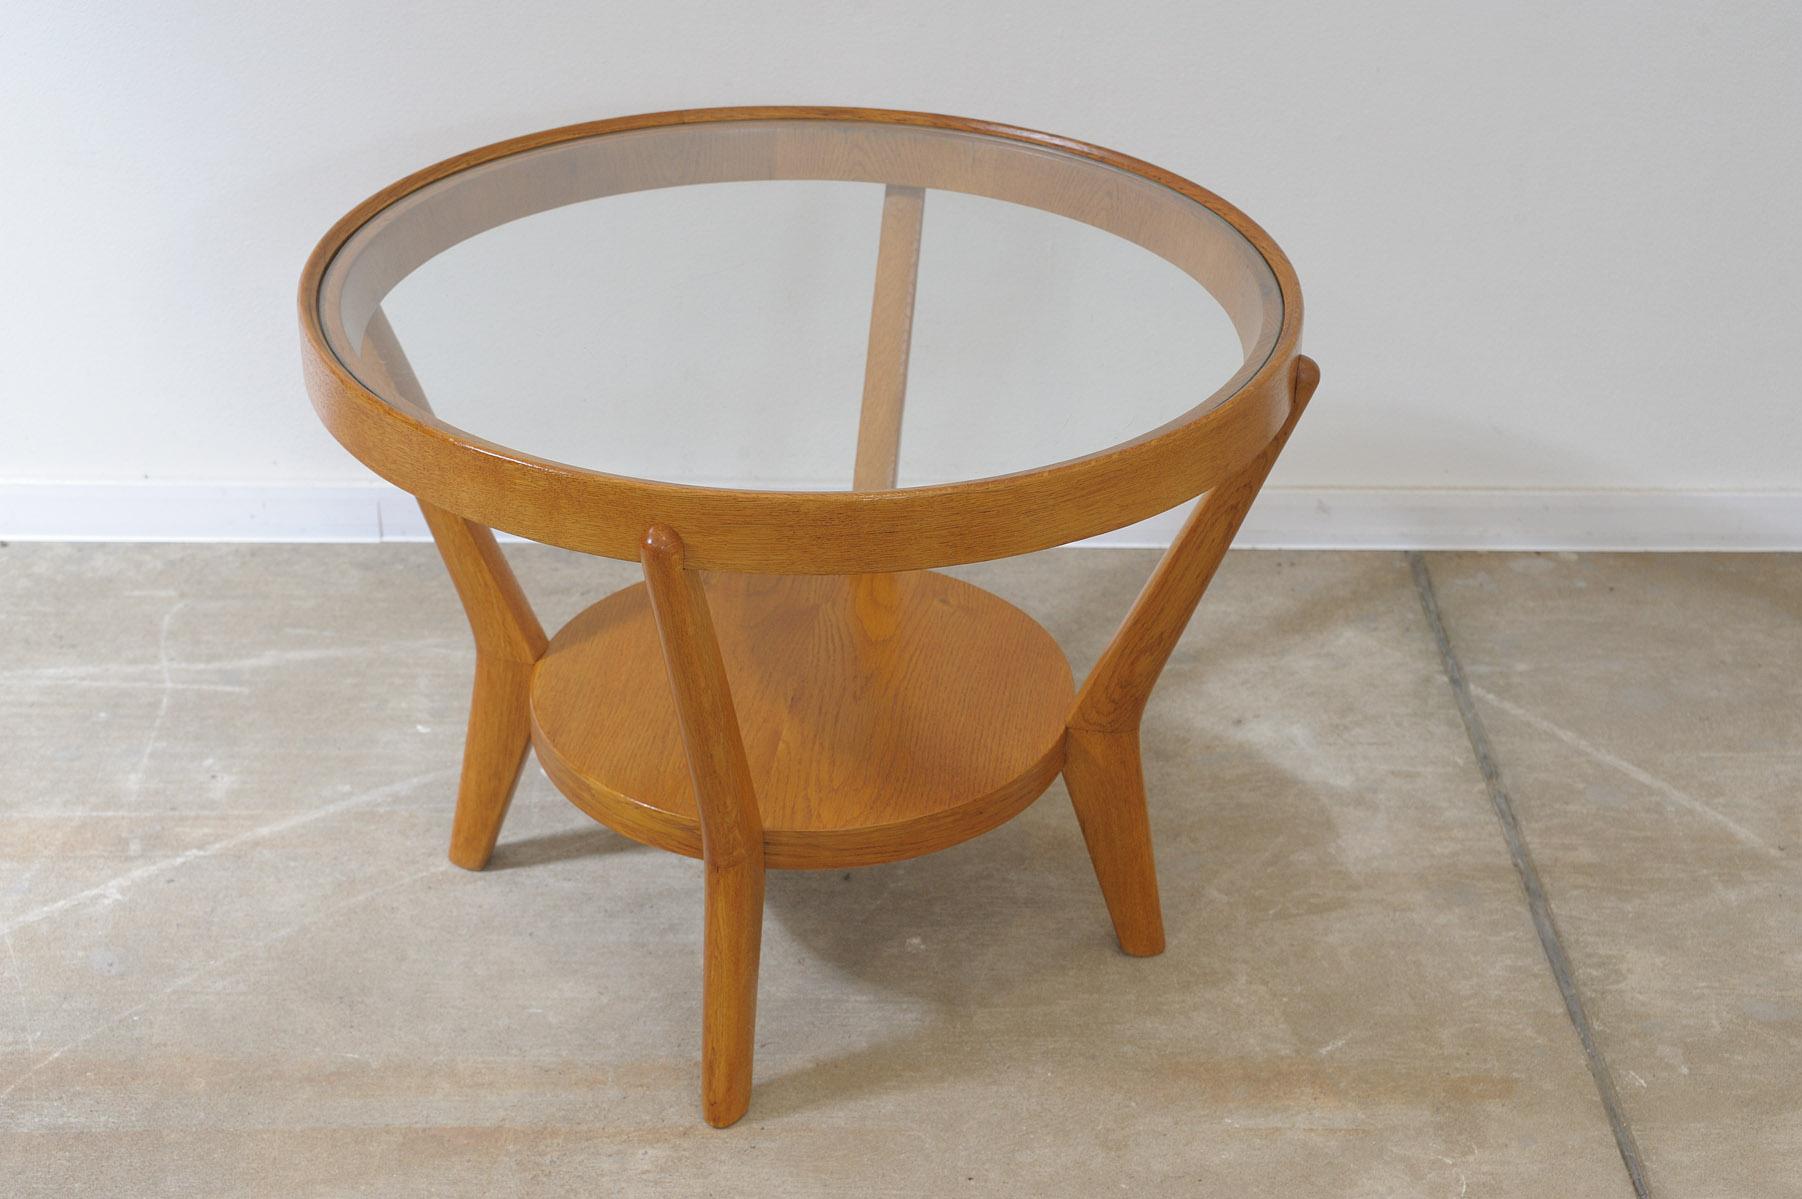 Glazed round table designed by famous architects Kropacek & Kozelka in 1944. Czechoslovakia. It can be used as a coffee or side table. Solid oak. In excellent condition, fully renovated.

Height: 56 cm

Diameter: 73 cm